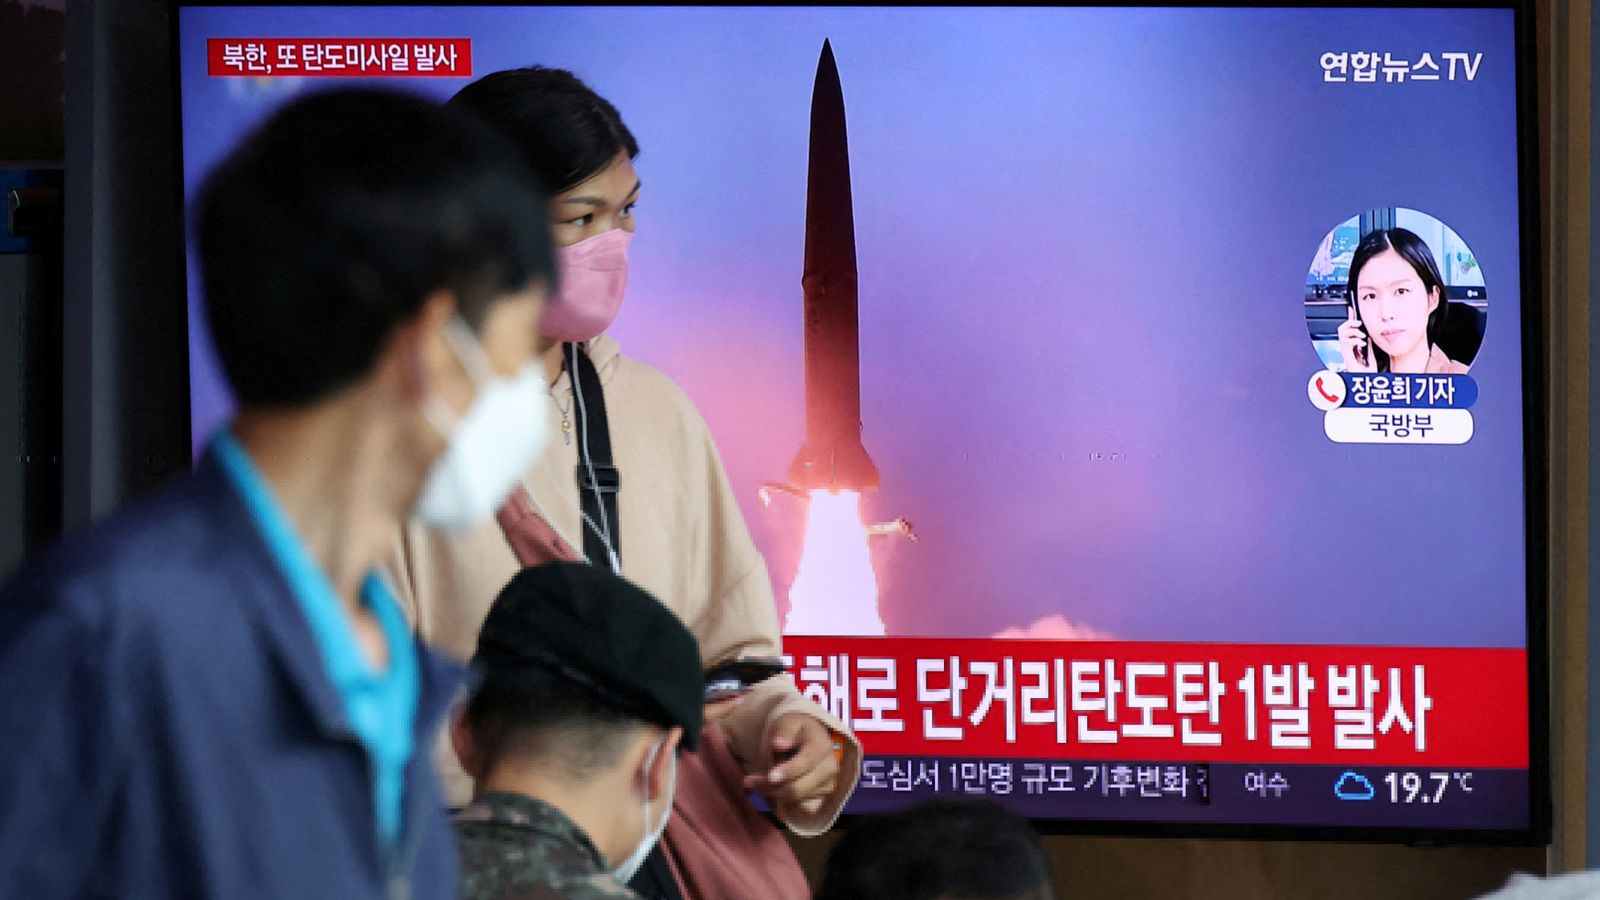 North Korean missile launch condemned as 'serious provocation'